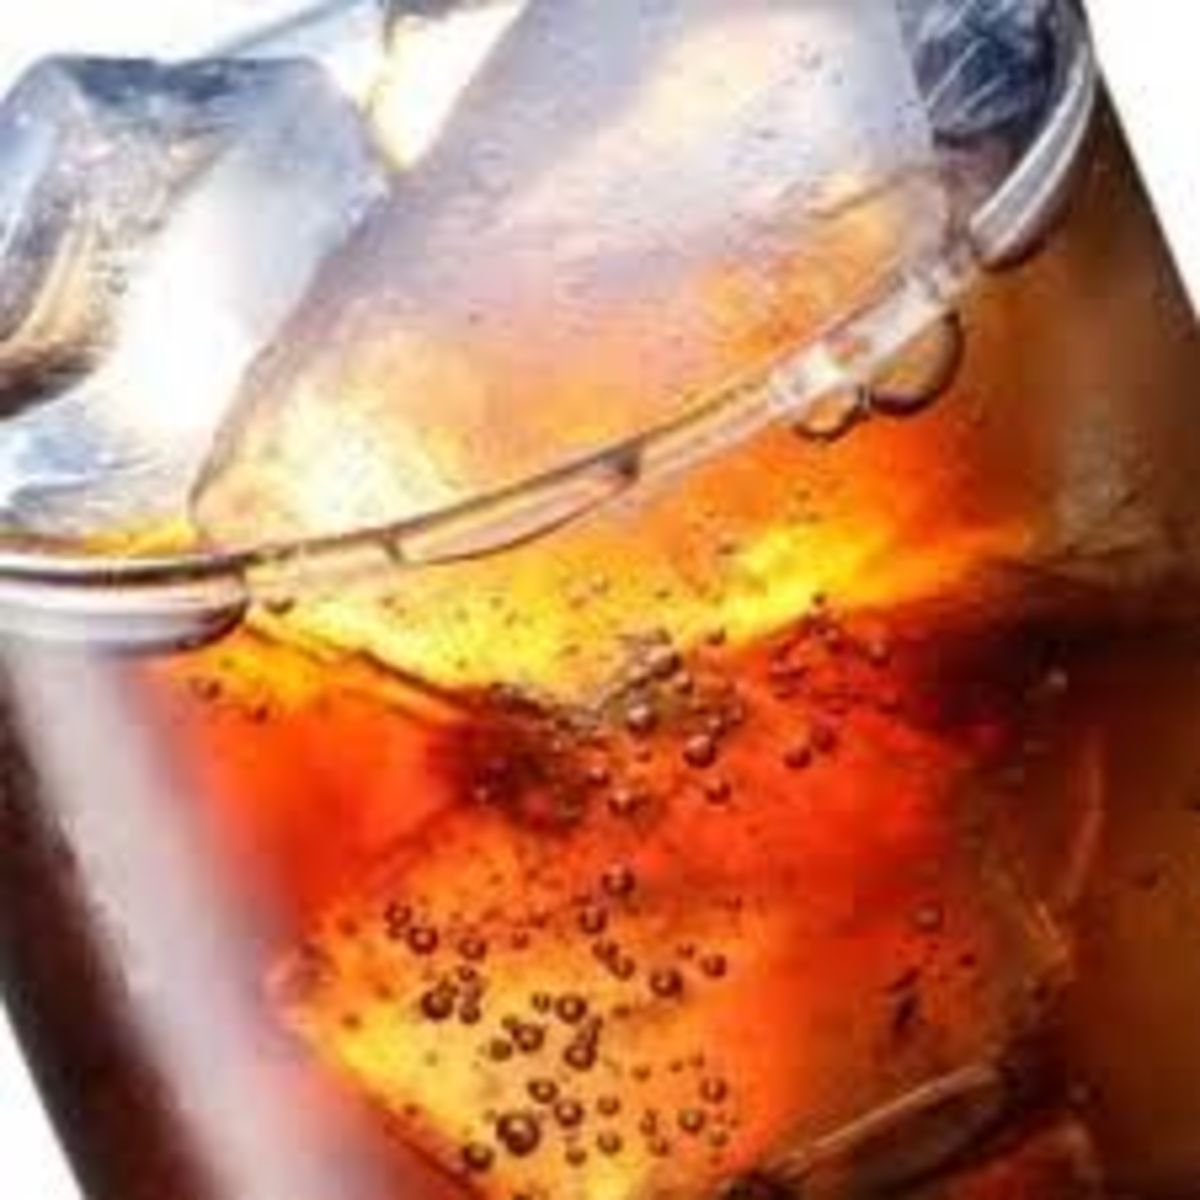 Carbonated drinks